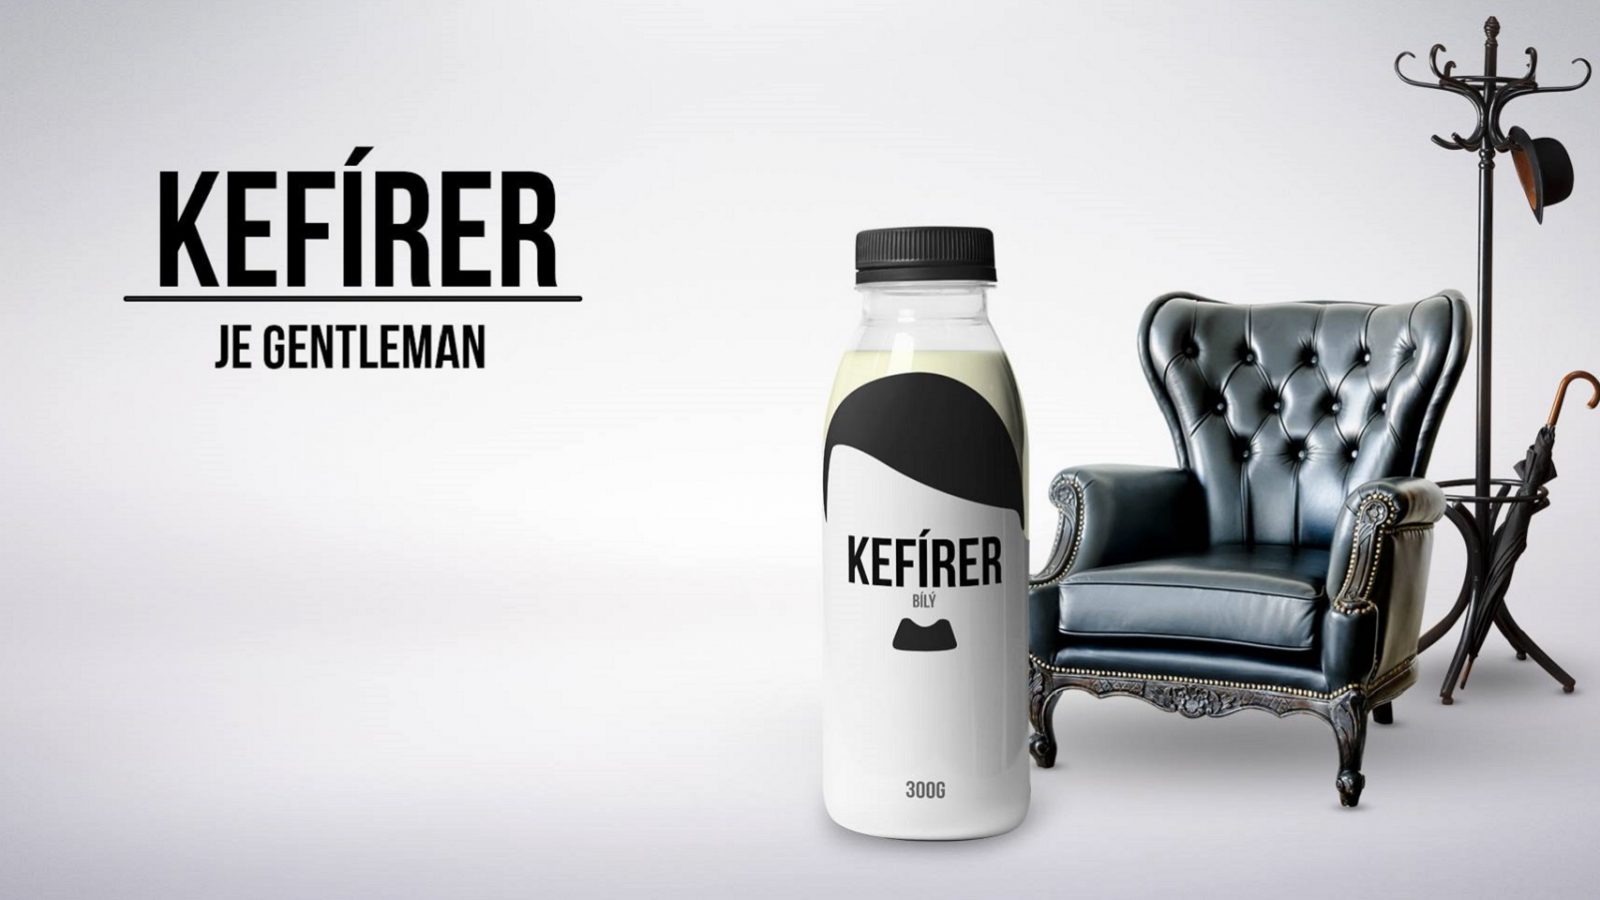 Kefírer: From Catchy Campaign to Controversial Product